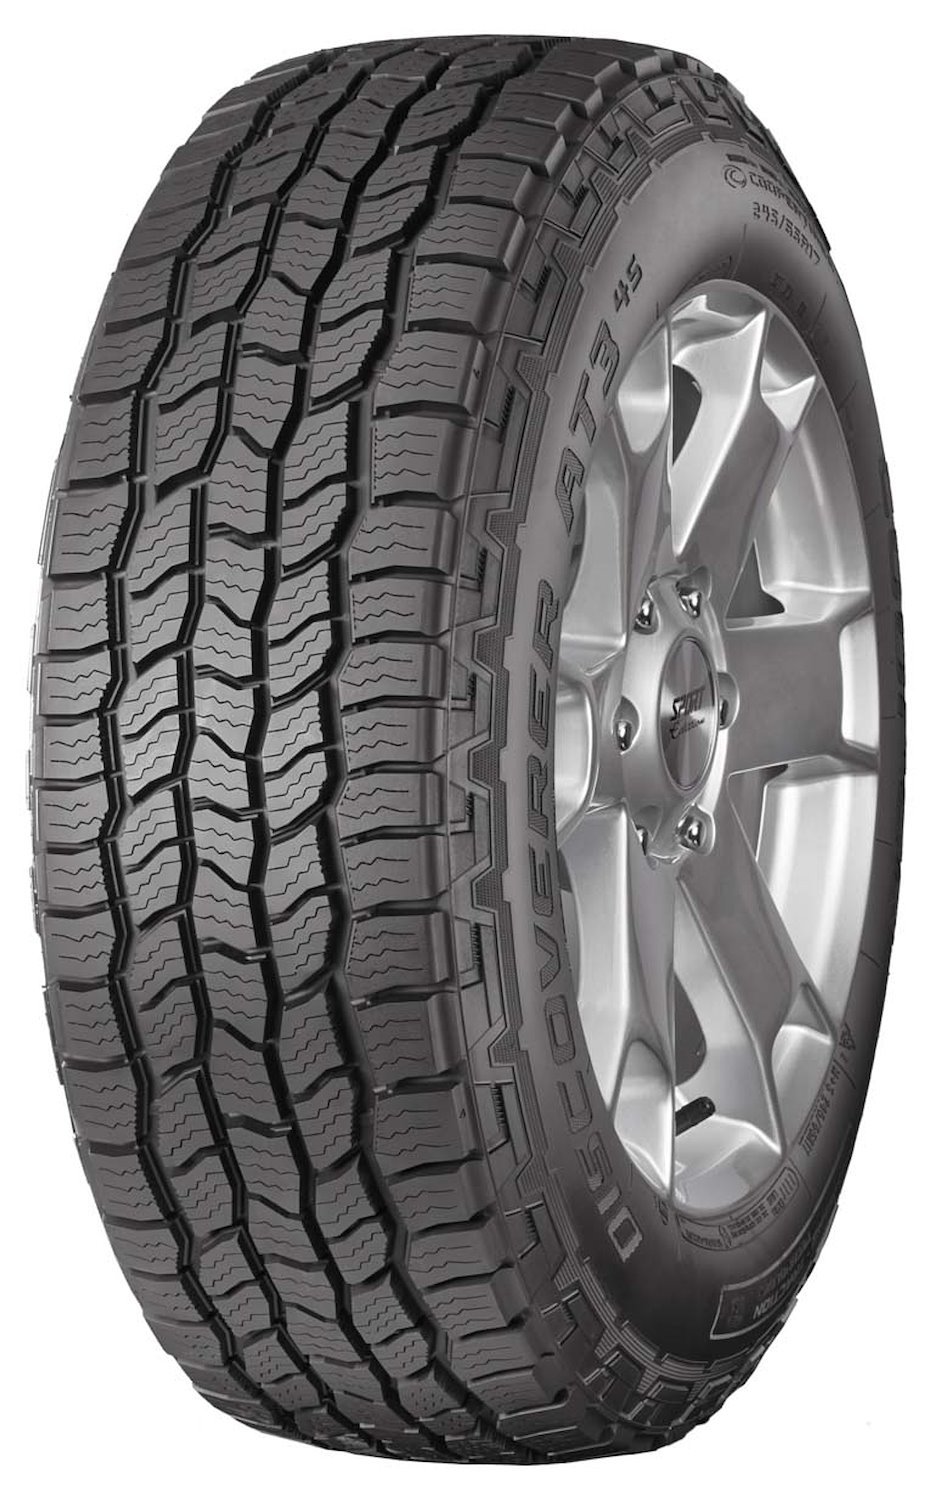 Discoverer AT3 4S All-Terrain Tire, 275/55R20